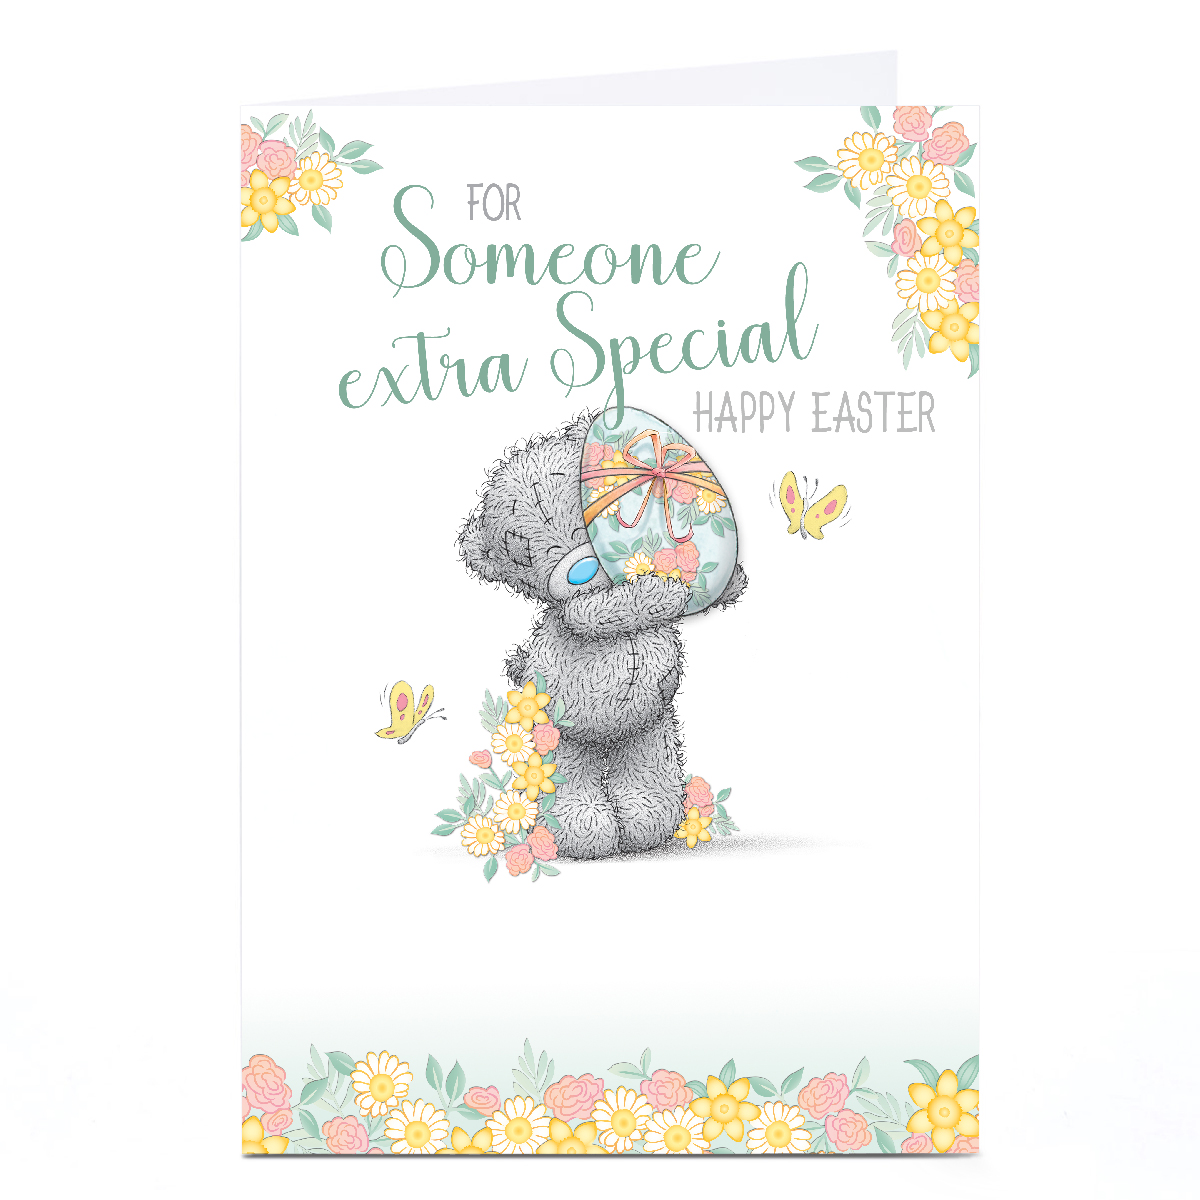 Personalised Tatty Teddy Easter Card - Someone Extra Special